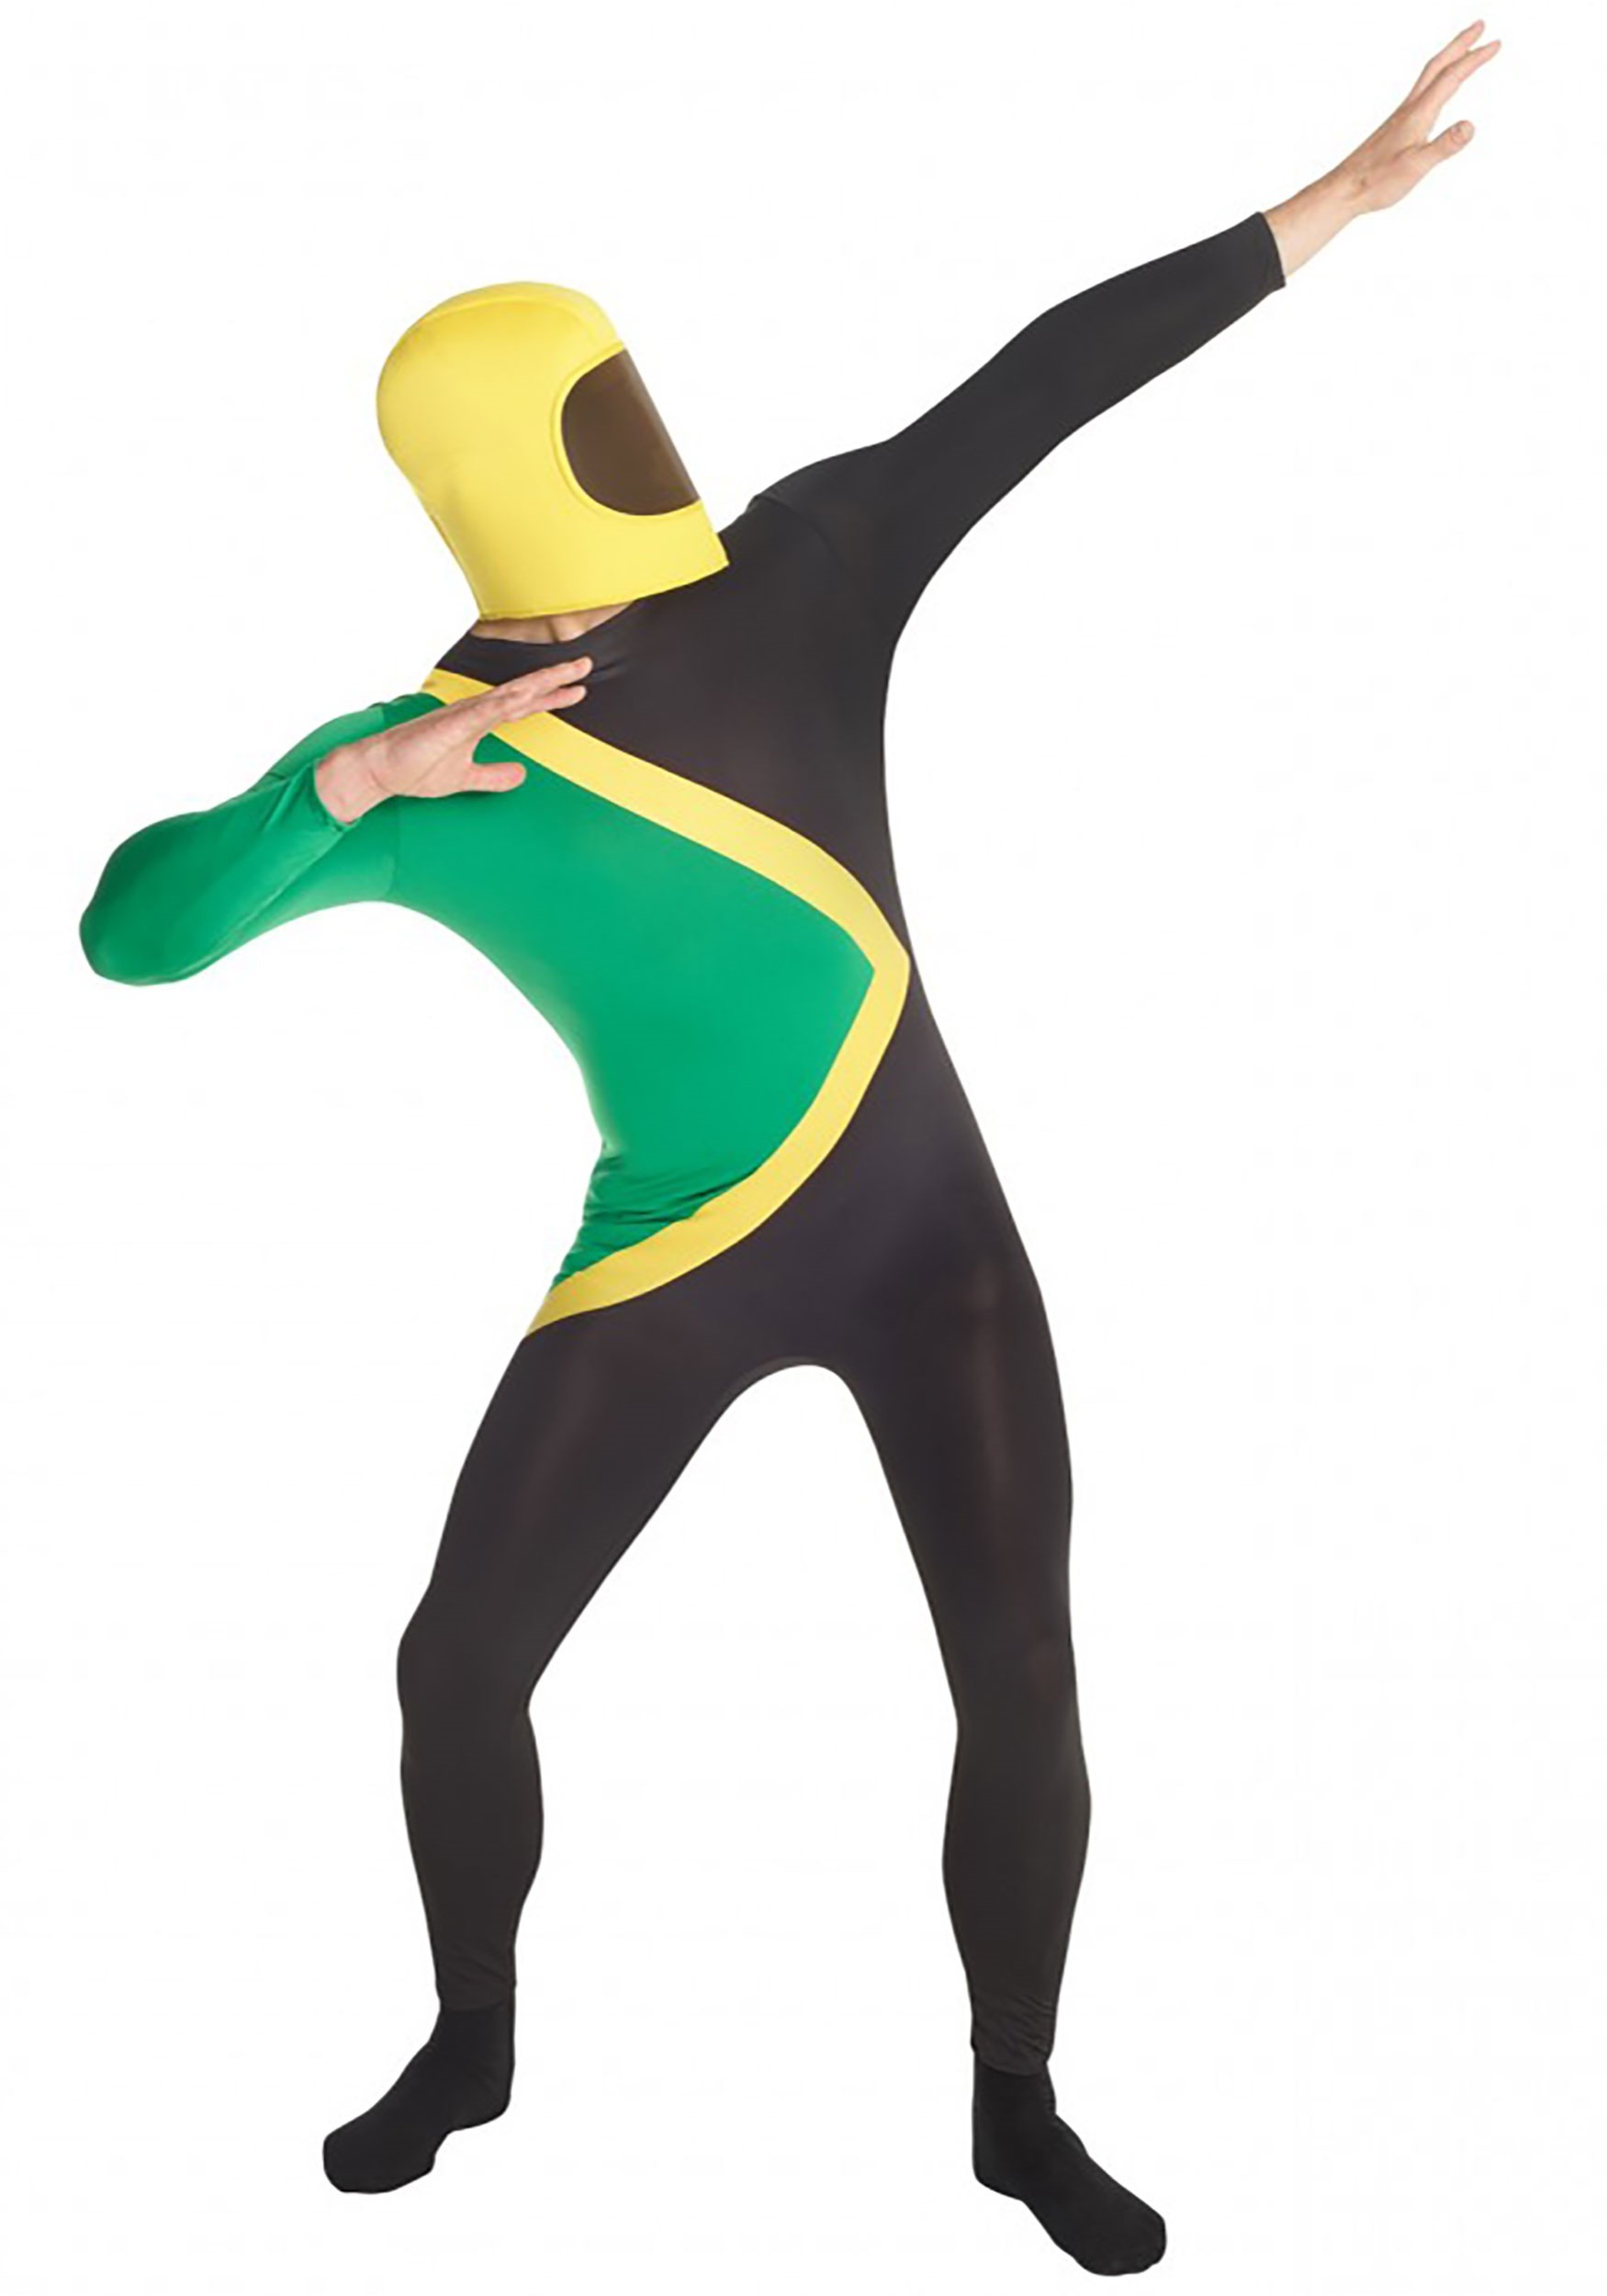 Photos - Fancy Dress Olympic Morphsuits Jamaican Bobsled Team Morphsuit for Men's Black/Green/Y 